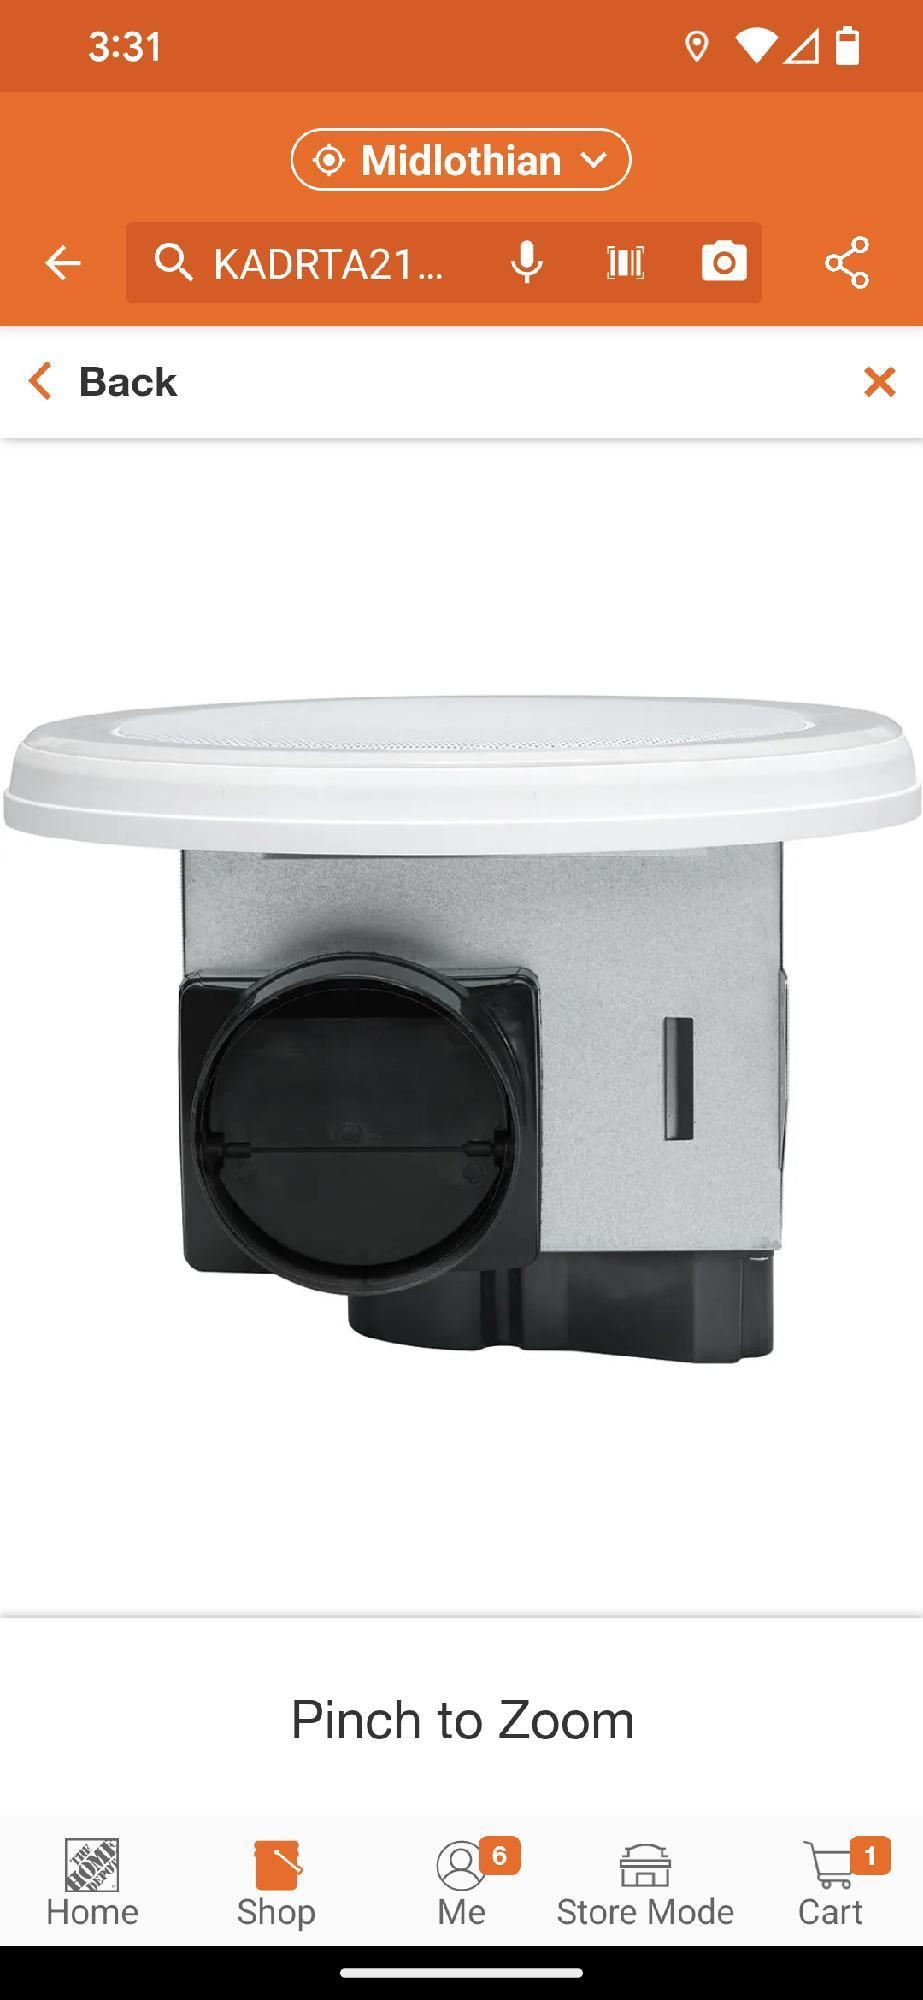 HOMEWERKS 80 CFM Ceiling Mount Bathroom Exhaust Fan with Bluetooth Speaker and LED Light, Appears to